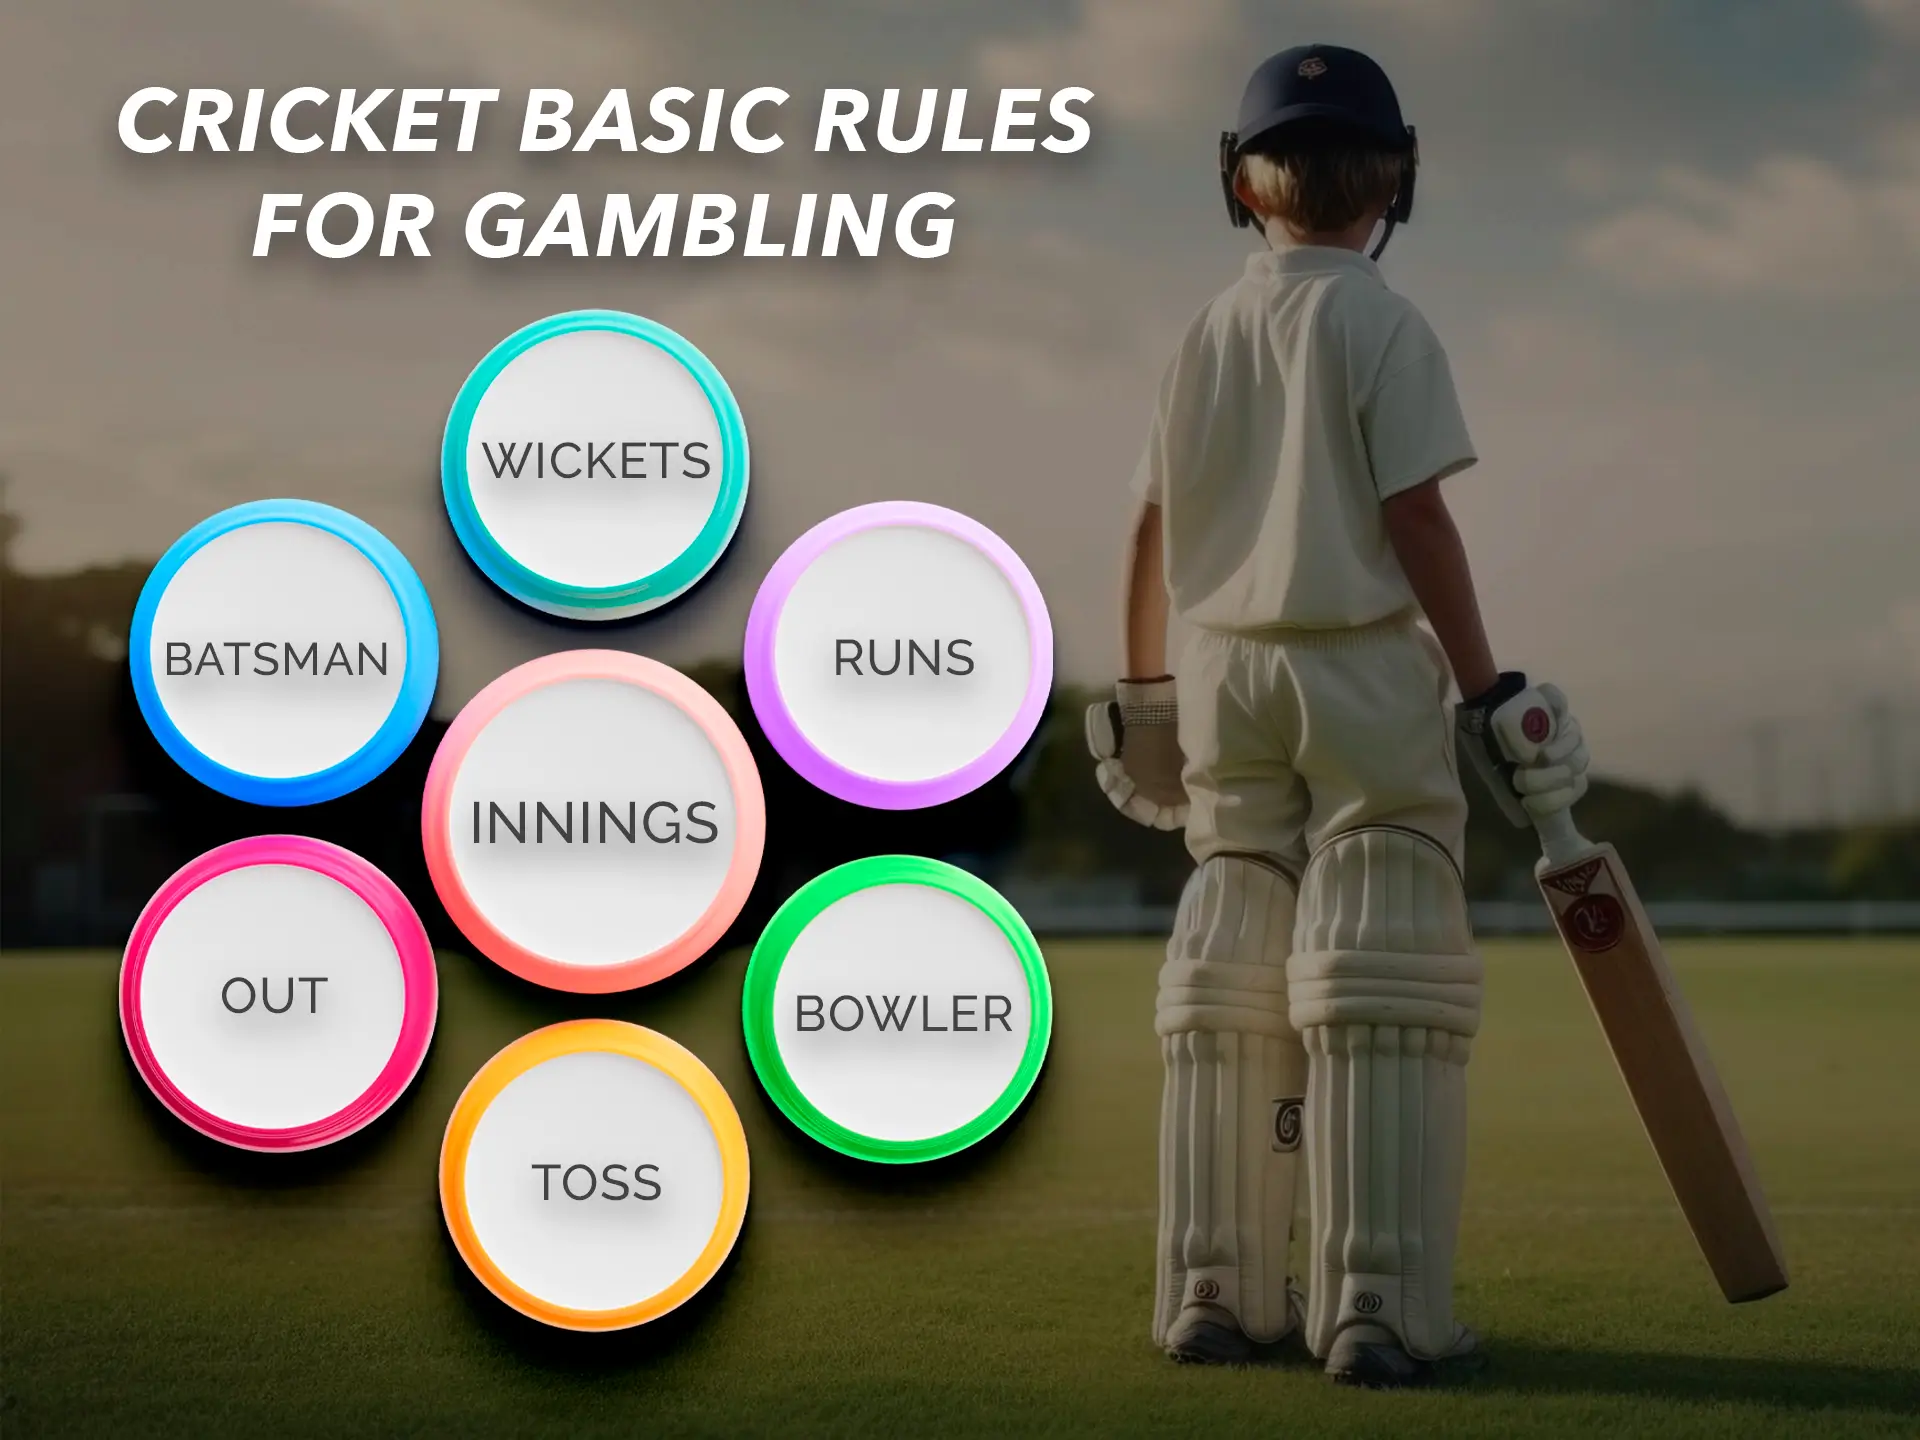 Learn the rules of cricket carefully to maximise your immersion in such a popular game.